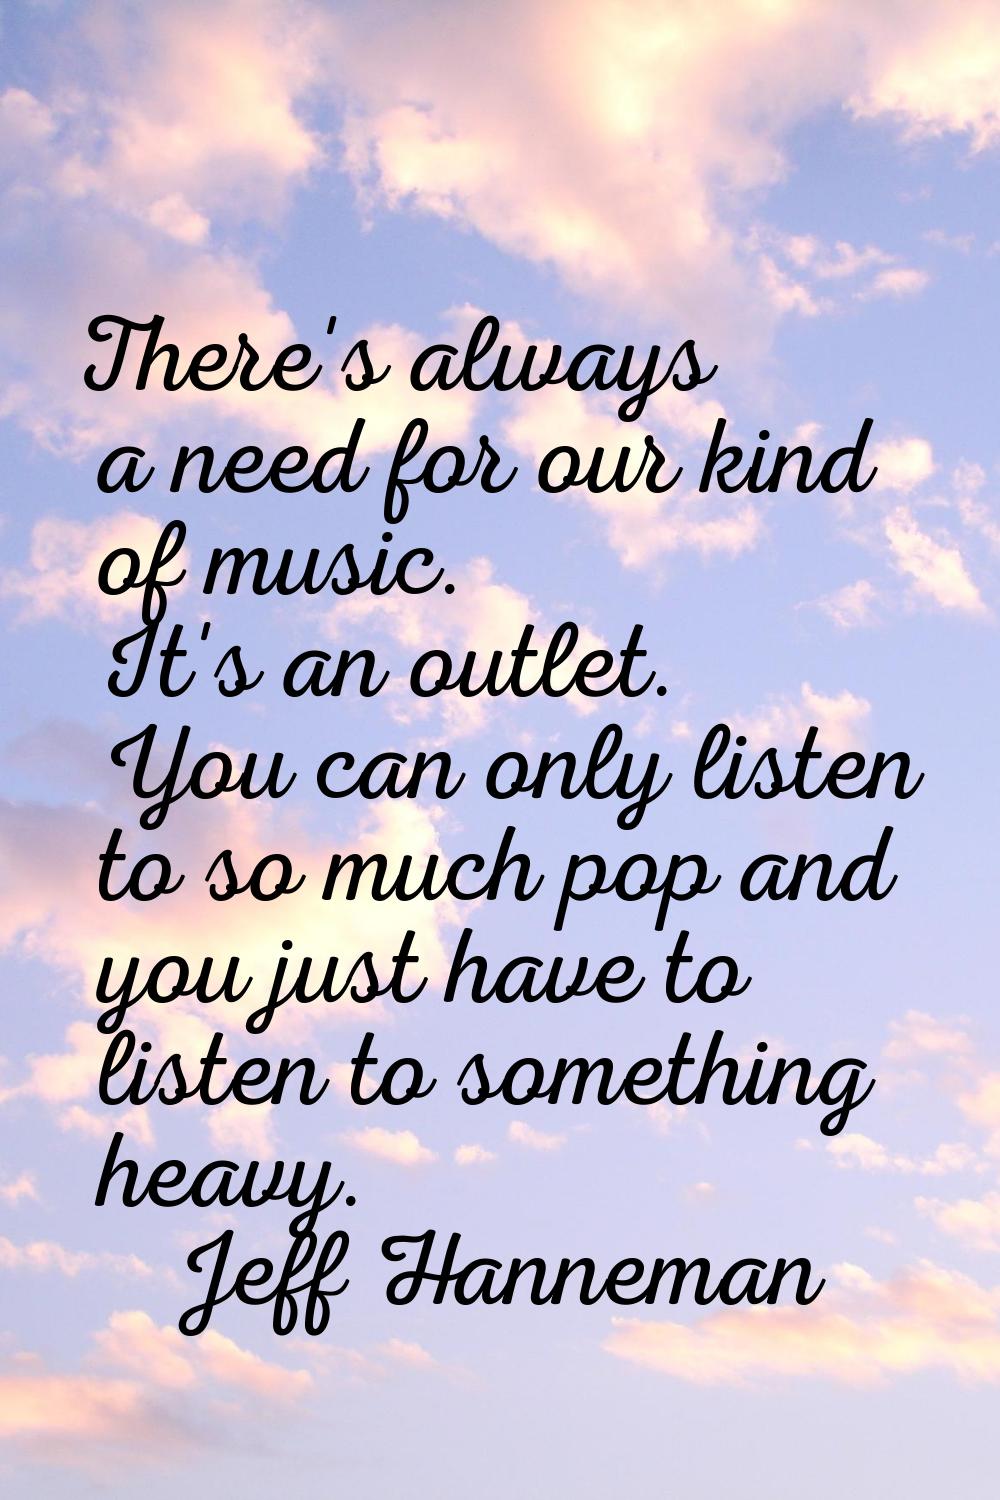 There's always a need for our kind of music. It's an outlet. You can only listen to so much pop and